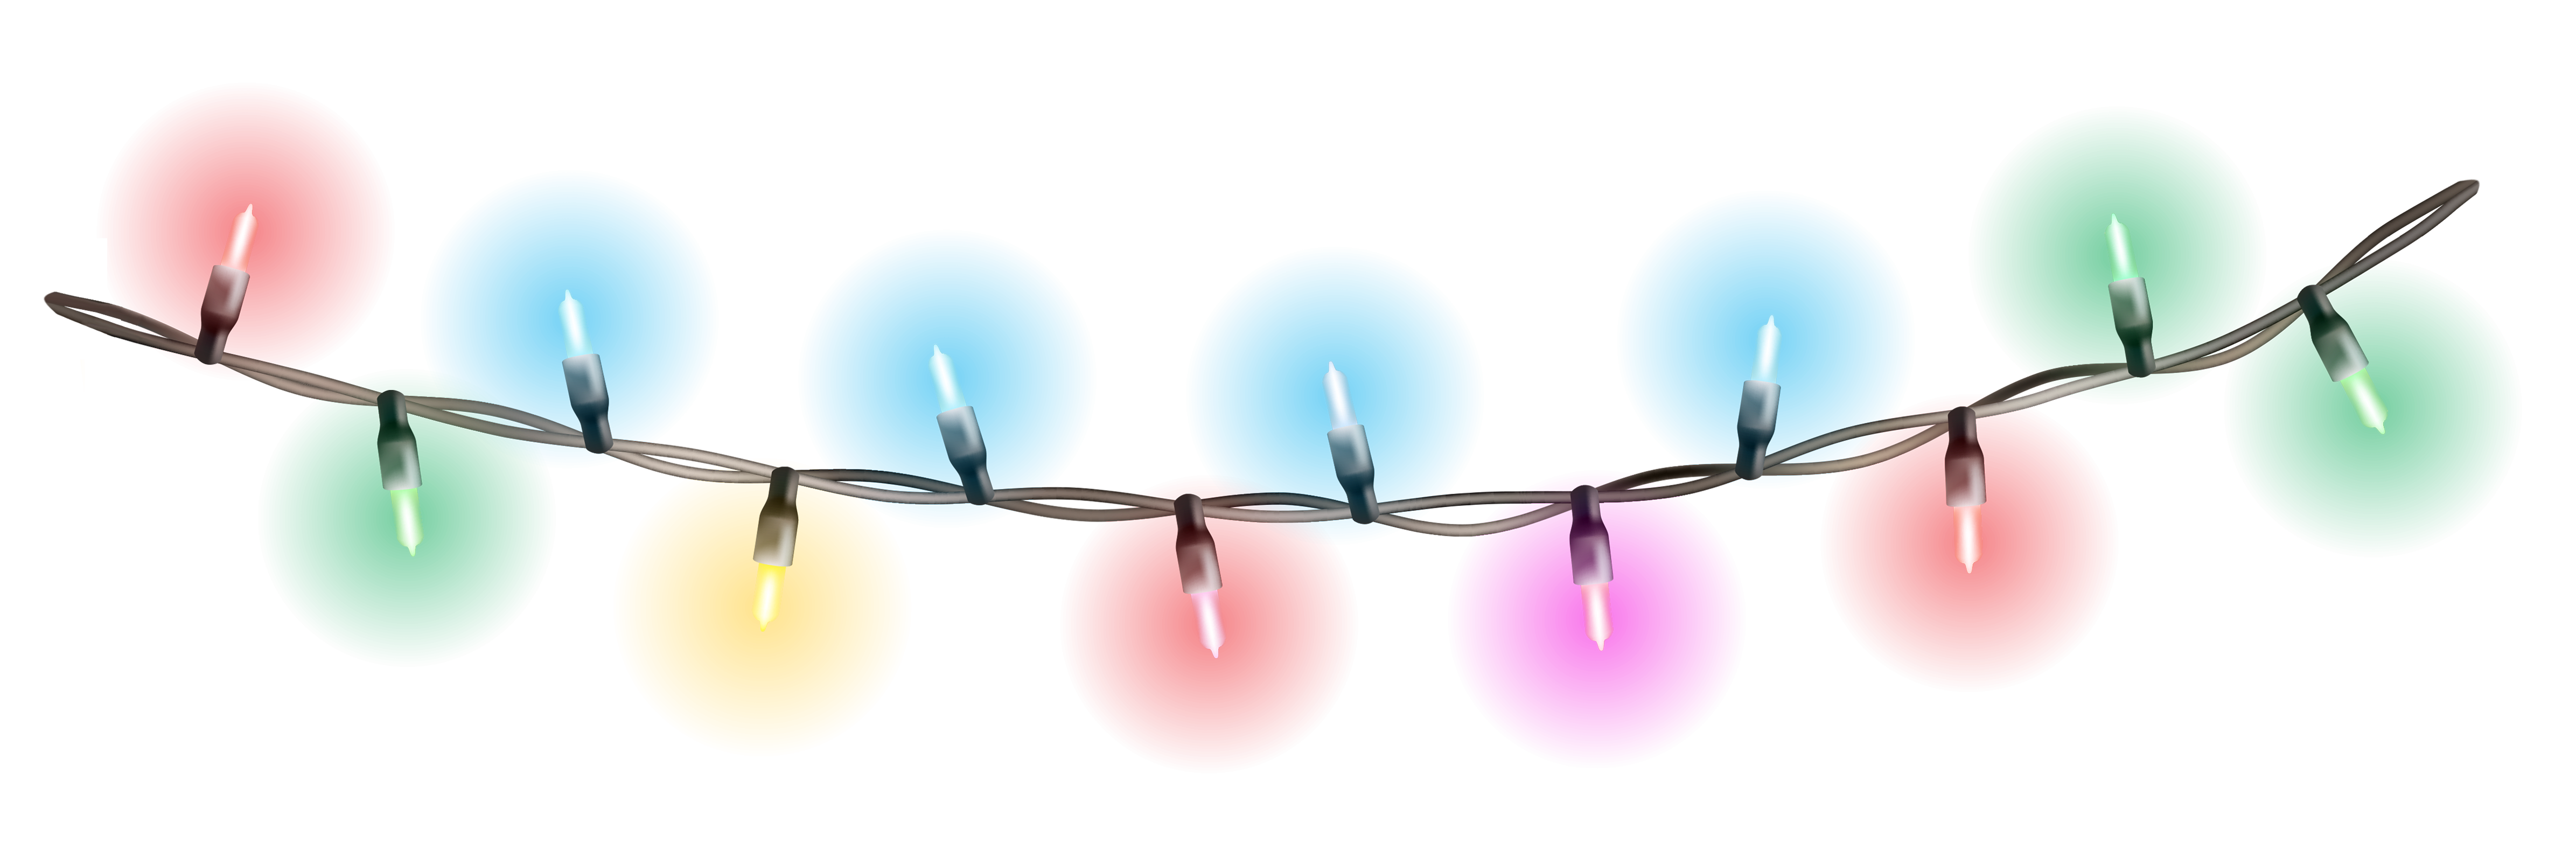 Download PNG image - Christmas Decoration Lights PNG Picture 